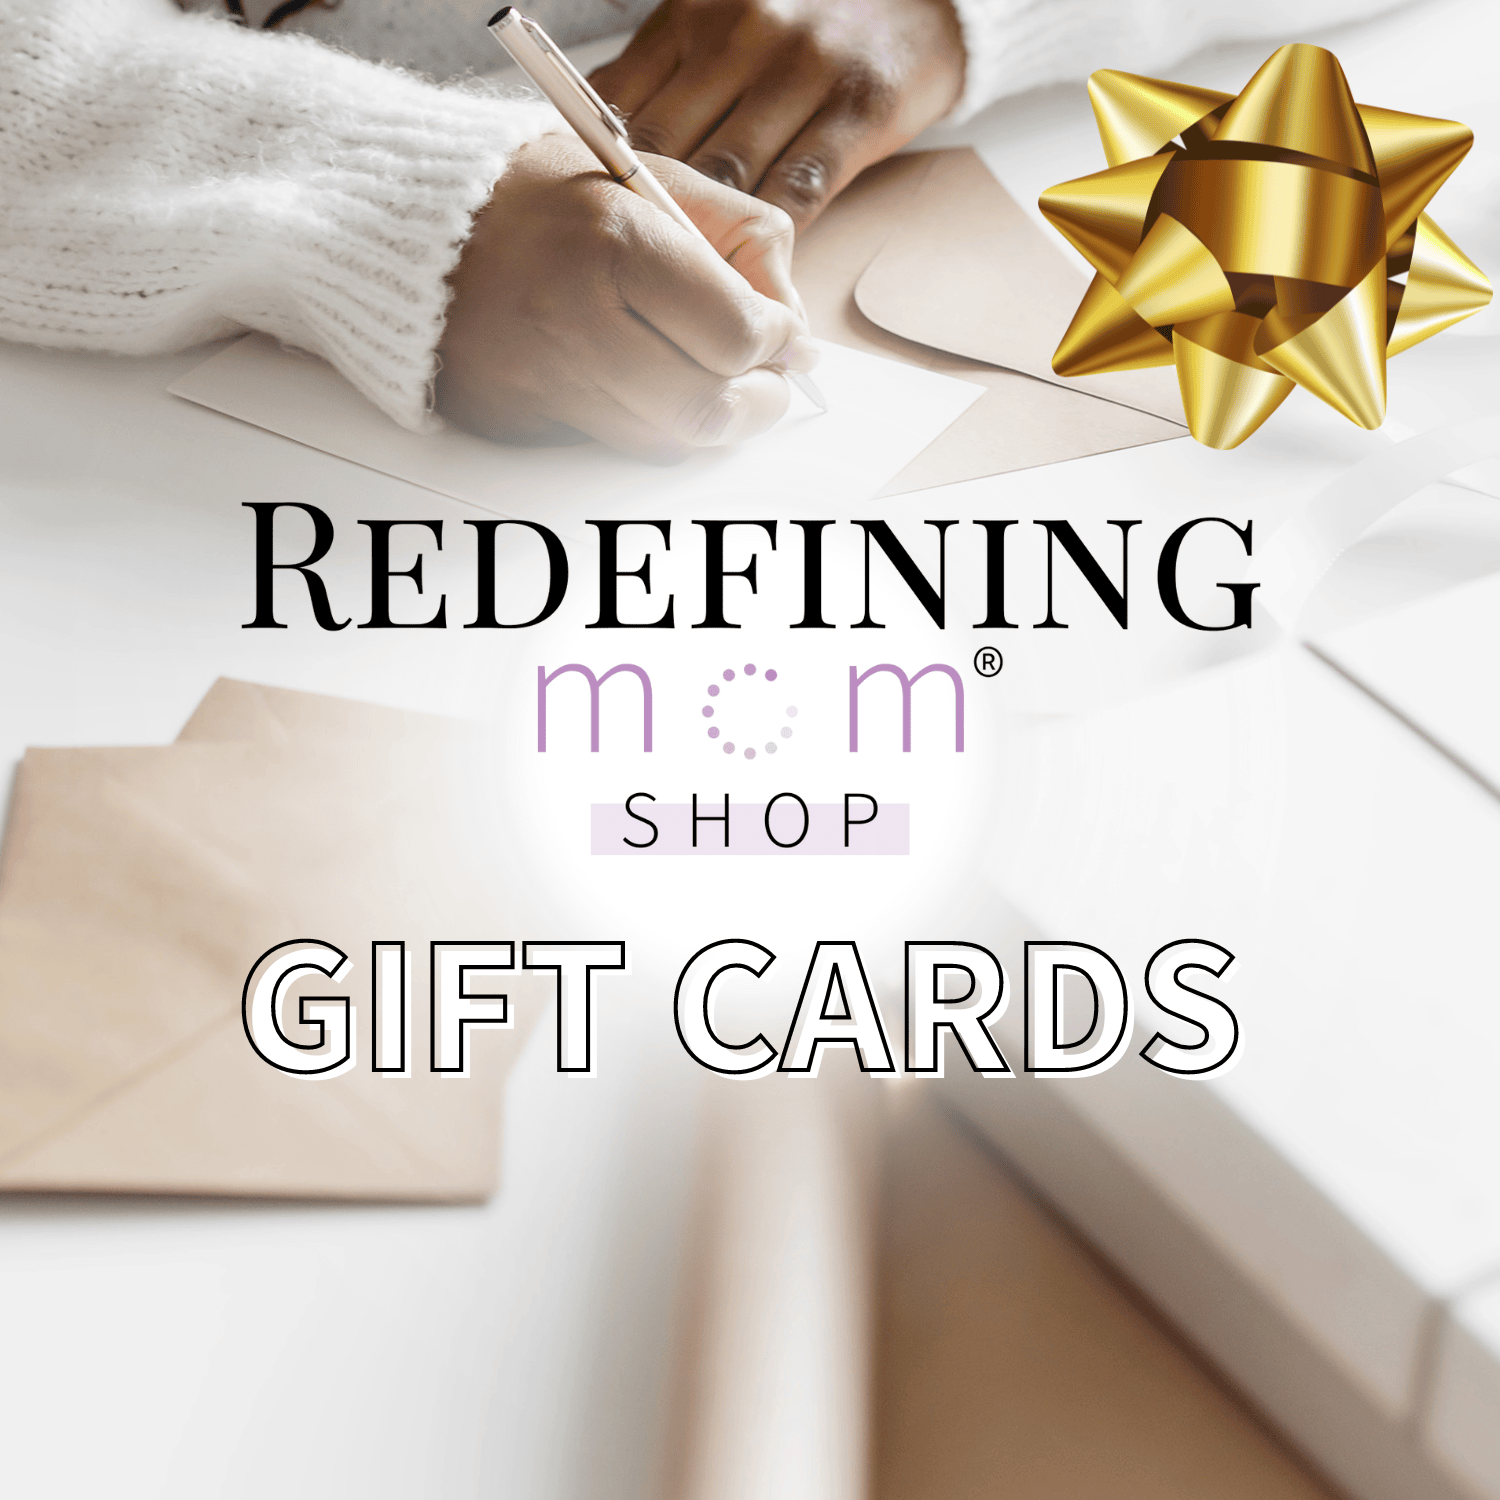 Get a Redefining Mom Shop gift card for your mom friends!